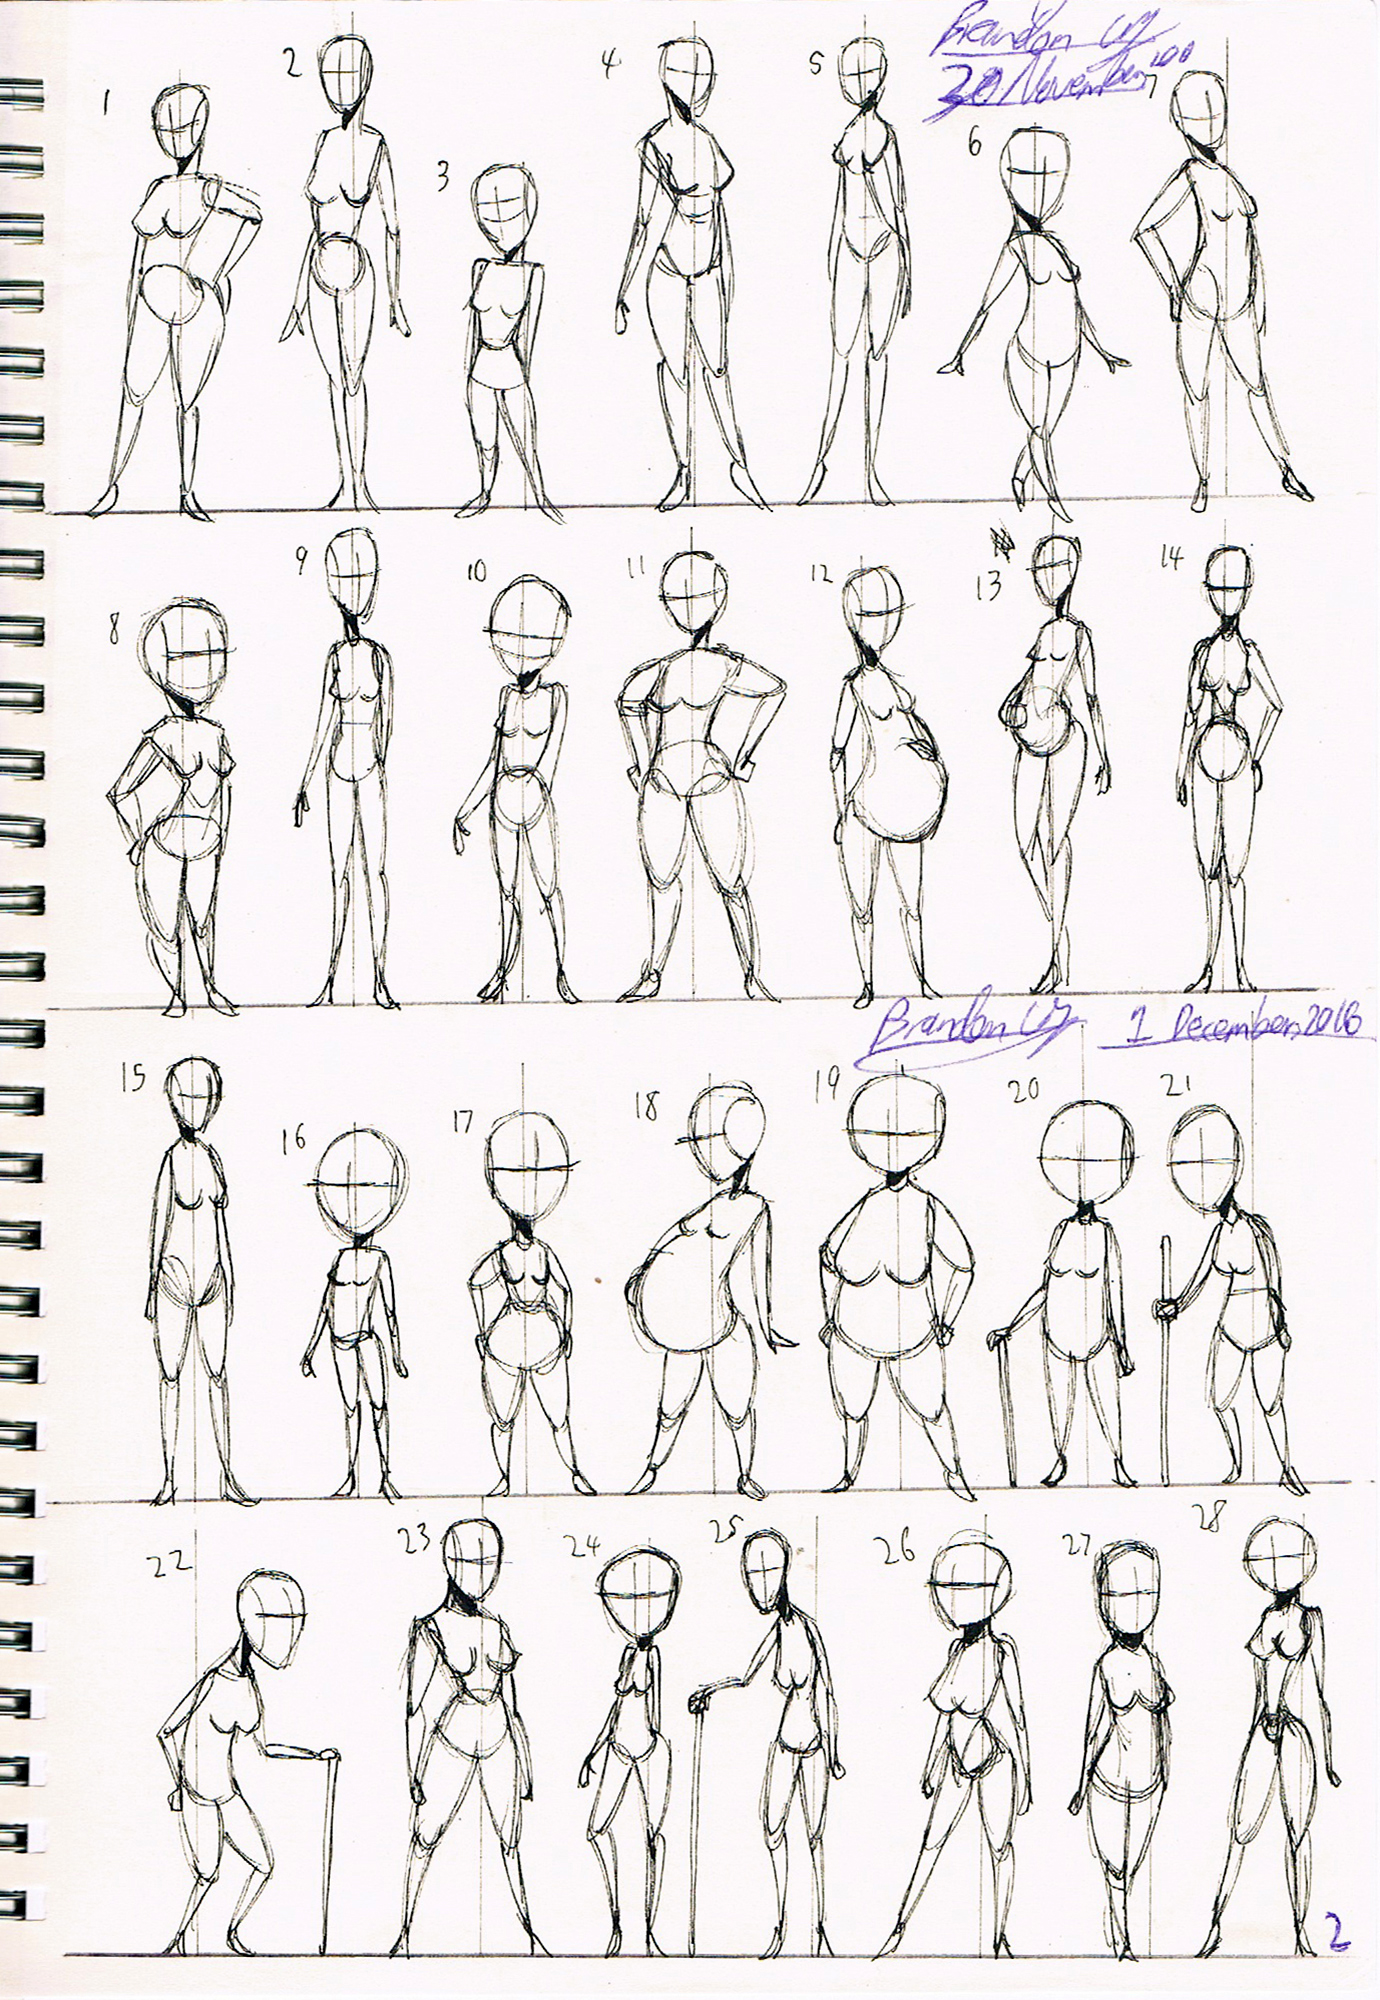 Cartoon Character Sketches- 2 (Female) by Brand-194 on DeviantArt